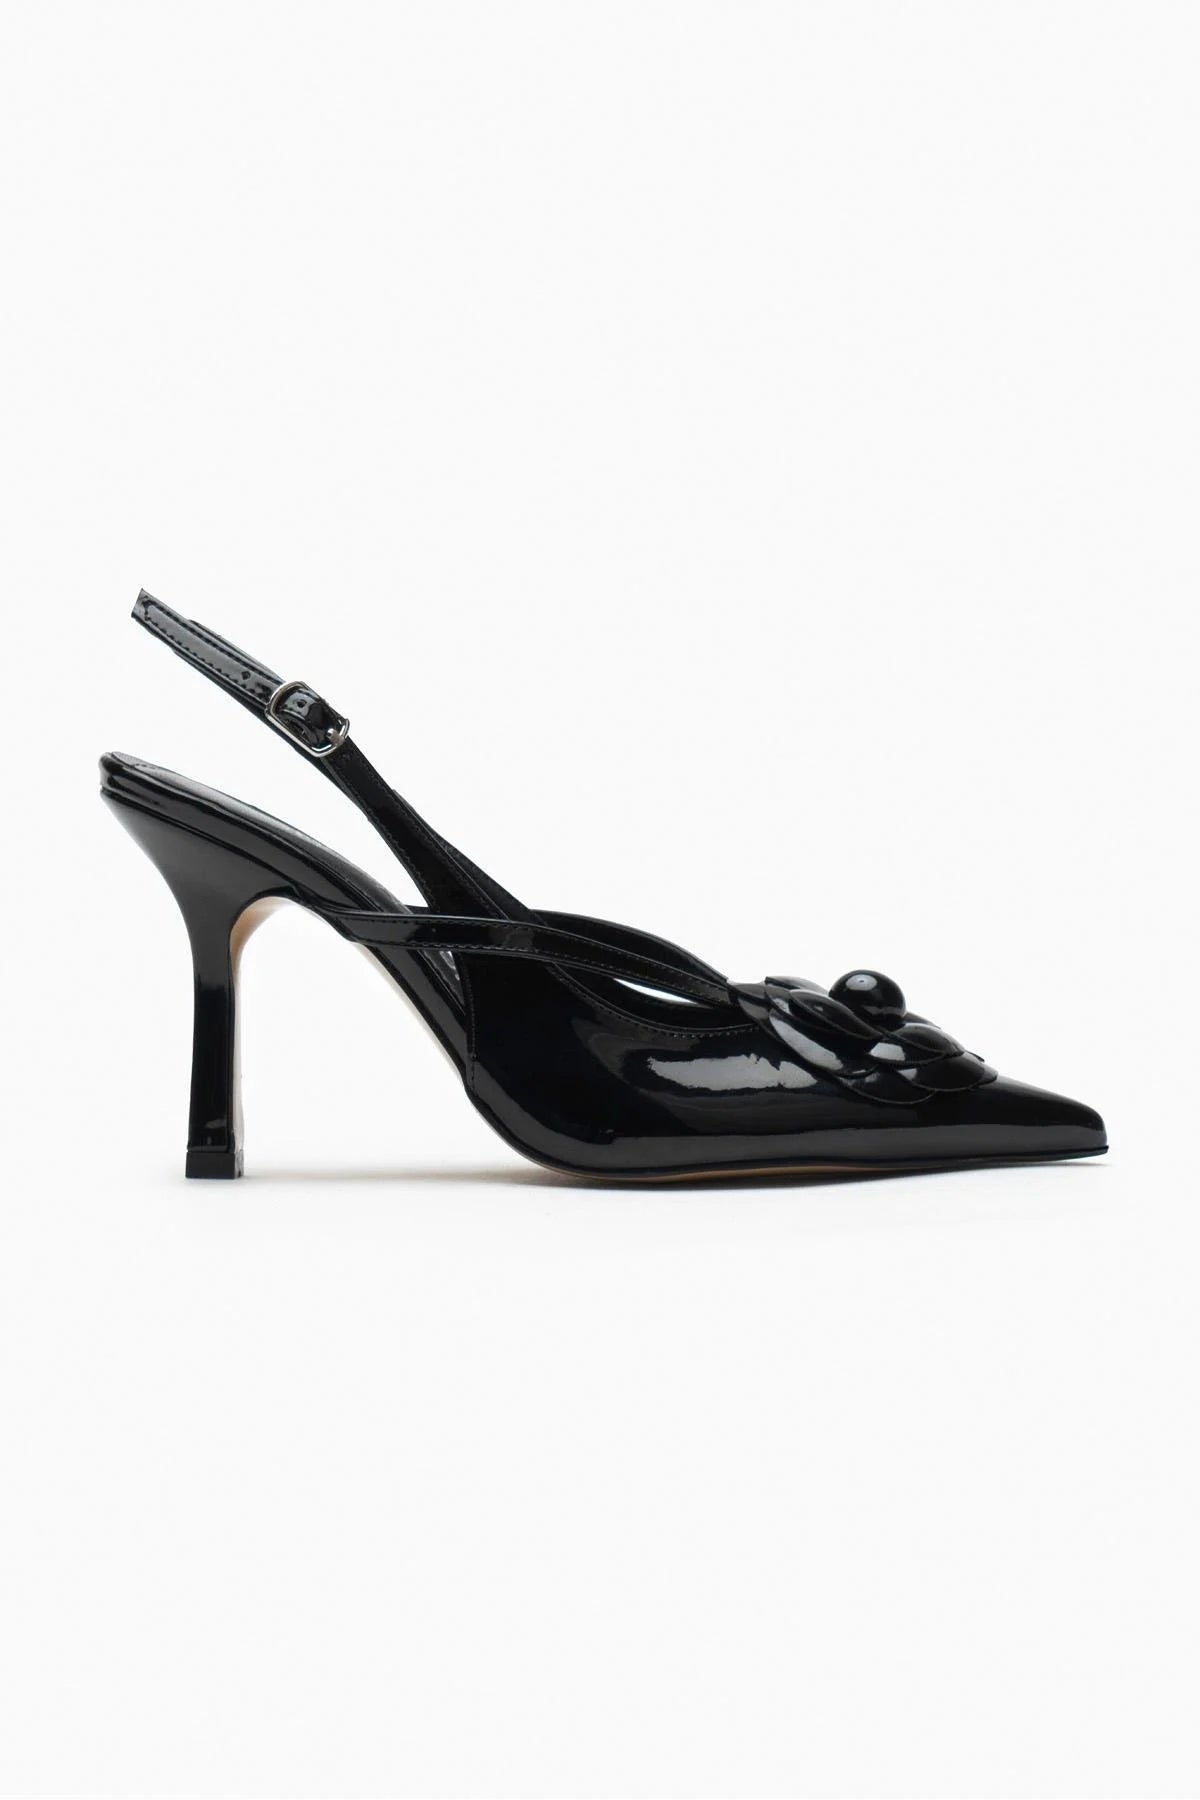 RALFHI BLACK Patent Leather ACCESSORY DETAIL ANKLE - TIED WOMEN'S THIN HEEL SHOES - Lebbse